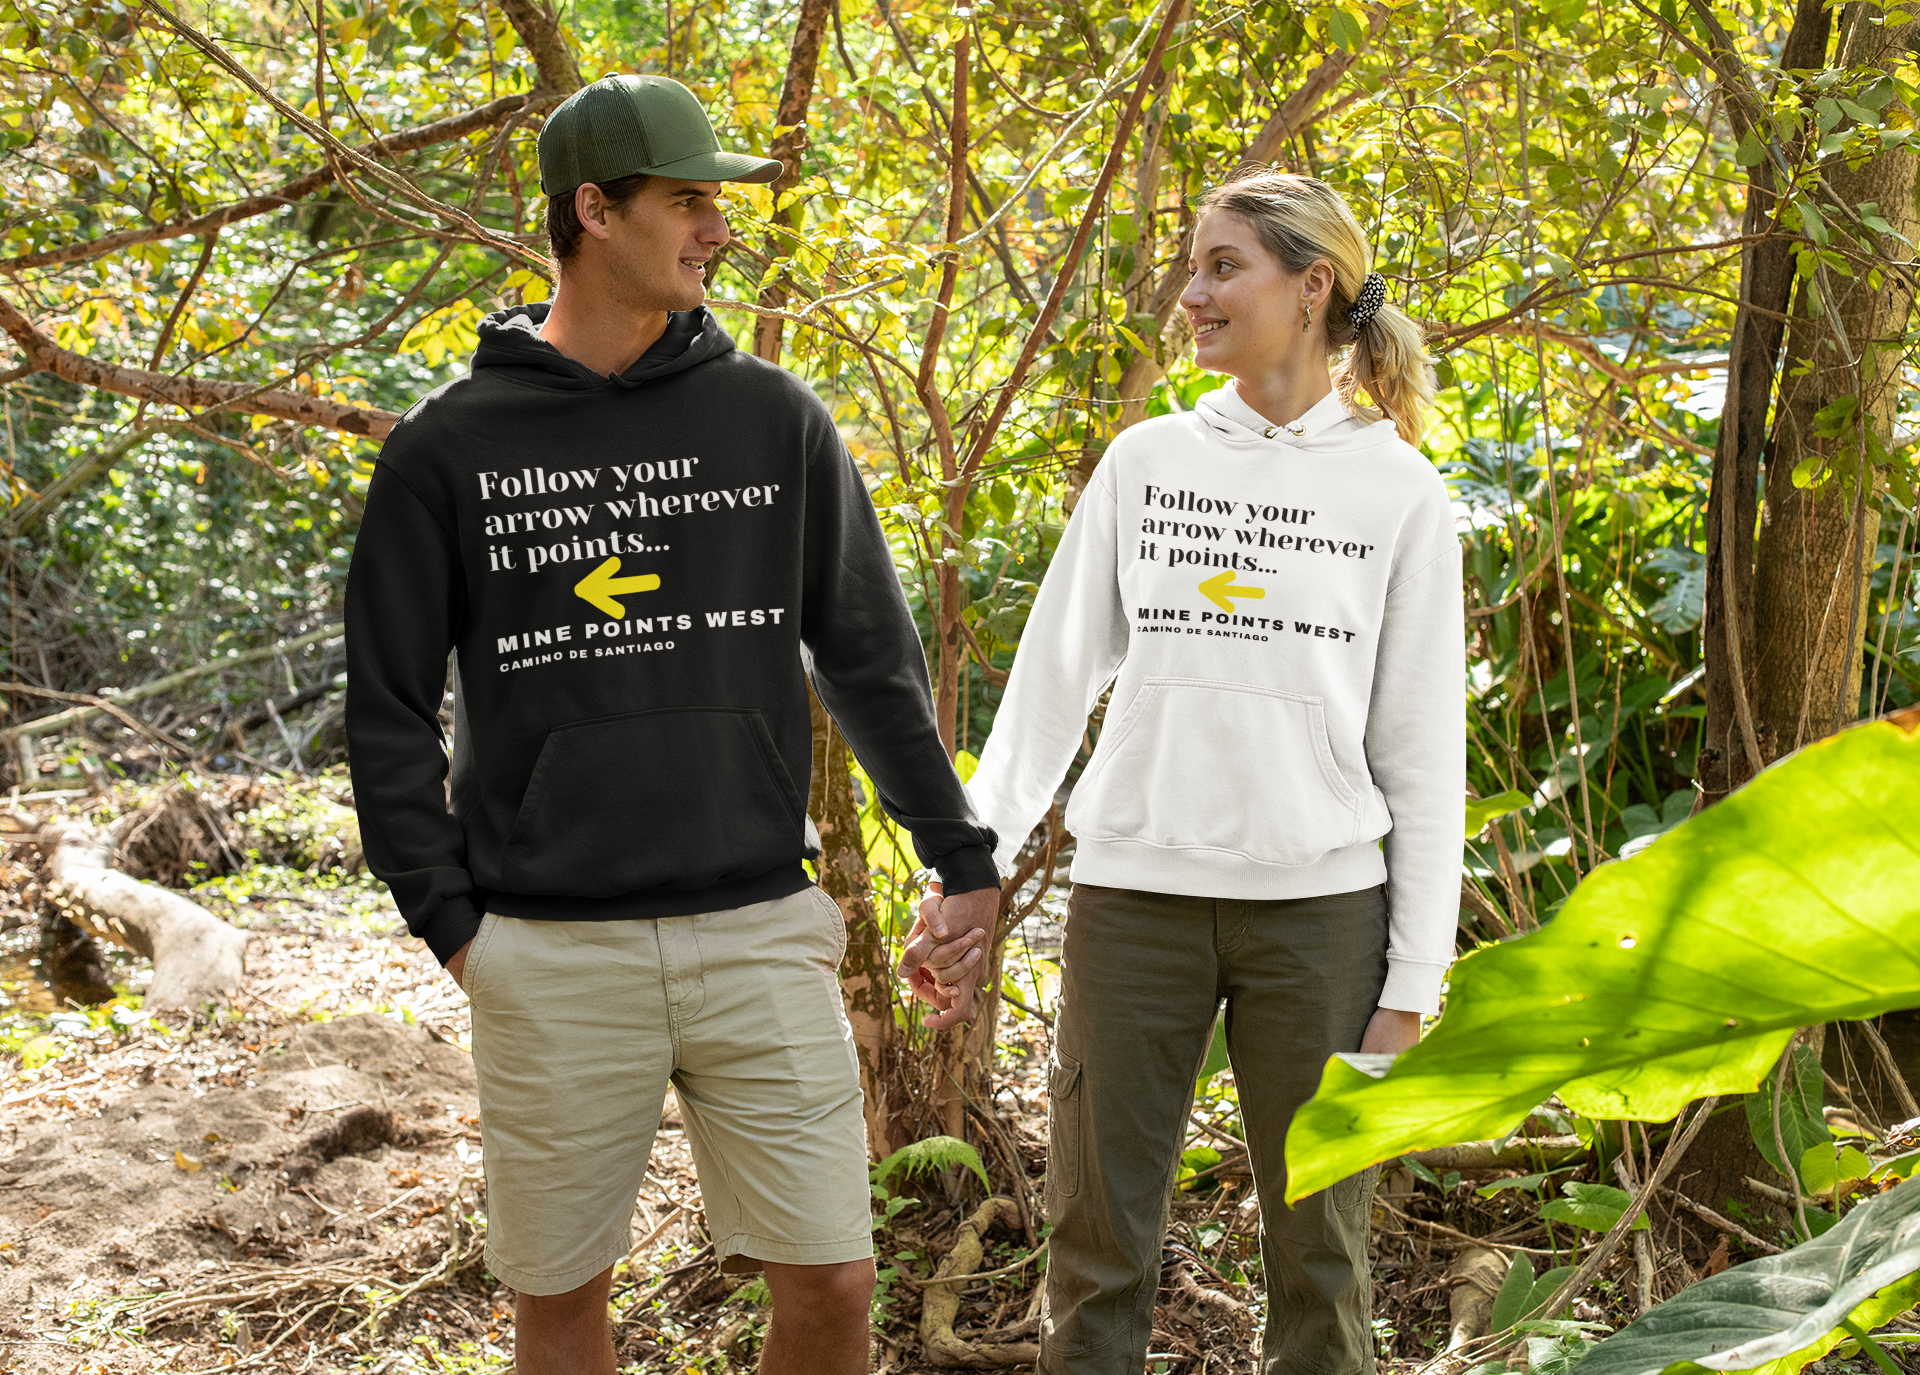 Camino Frances hiking hoodie worn by a couple hiking in the woods. The male is wearing the black hoodie and the female on the right is wearing the white hoodie.